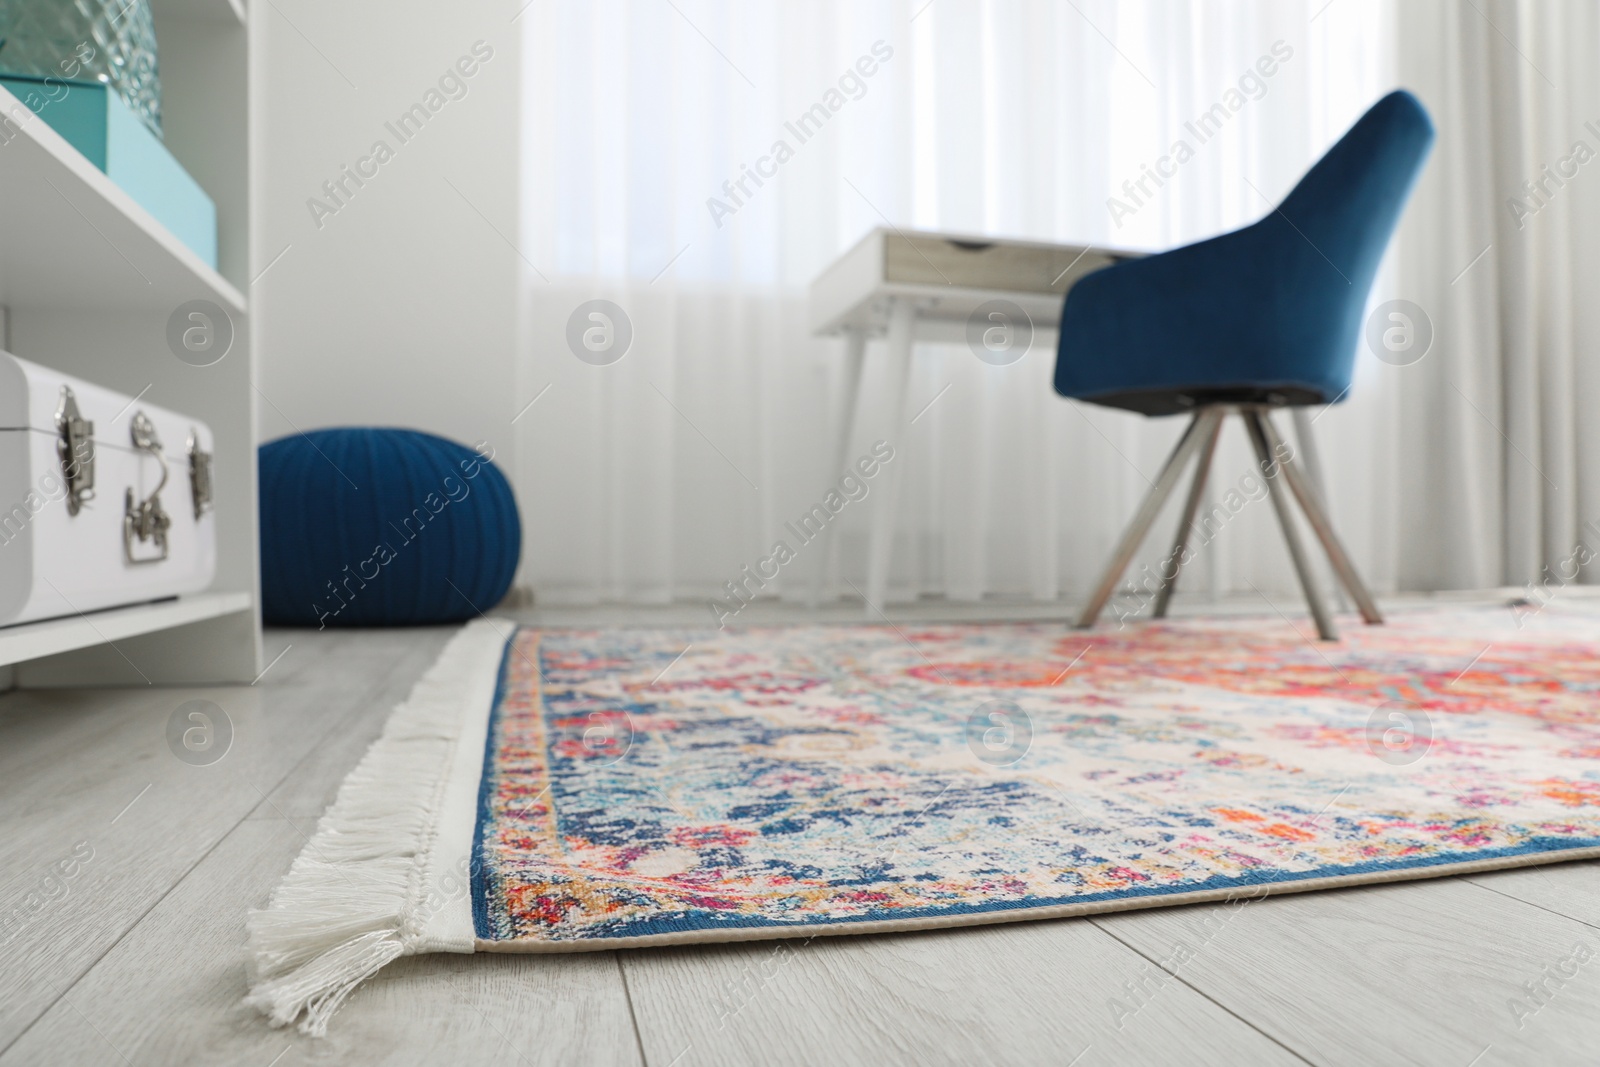 Photo of Stylish rug and furniture in room, low angle view. Interior design